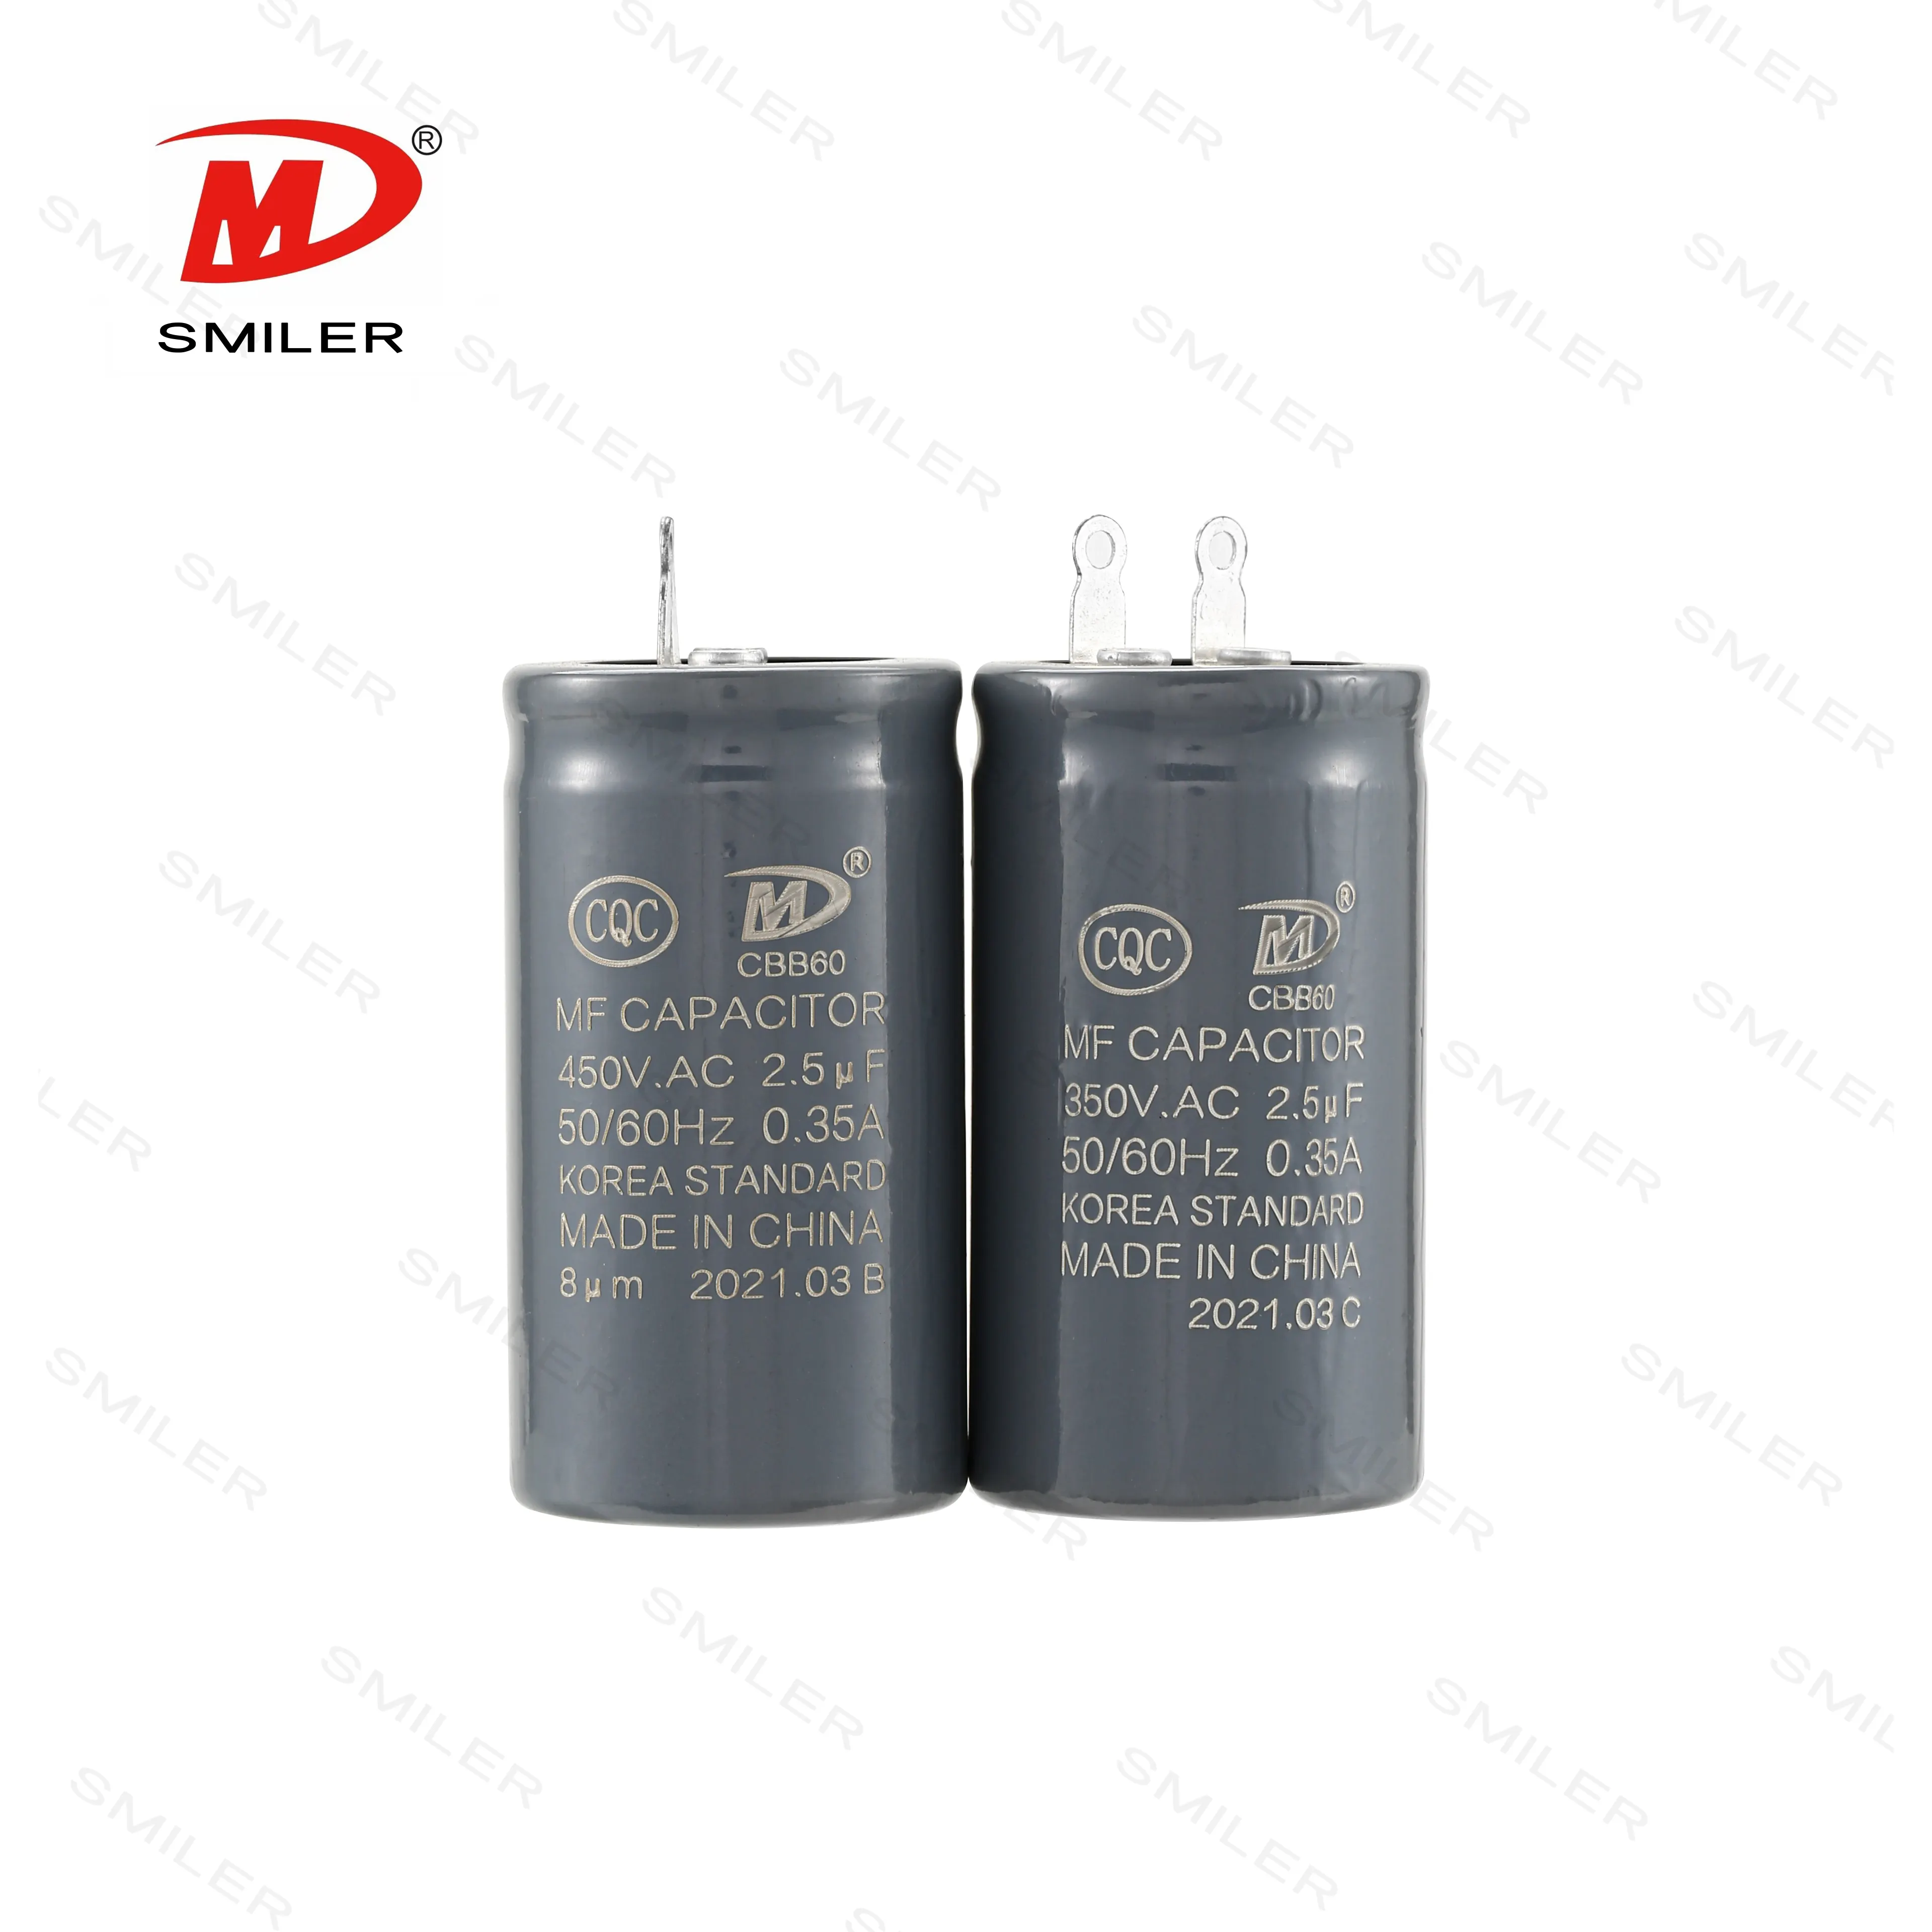 Celling Fan Capacitor Ceiling Fan Cbb60 Capacitor Fan Capacitor 3.5uf